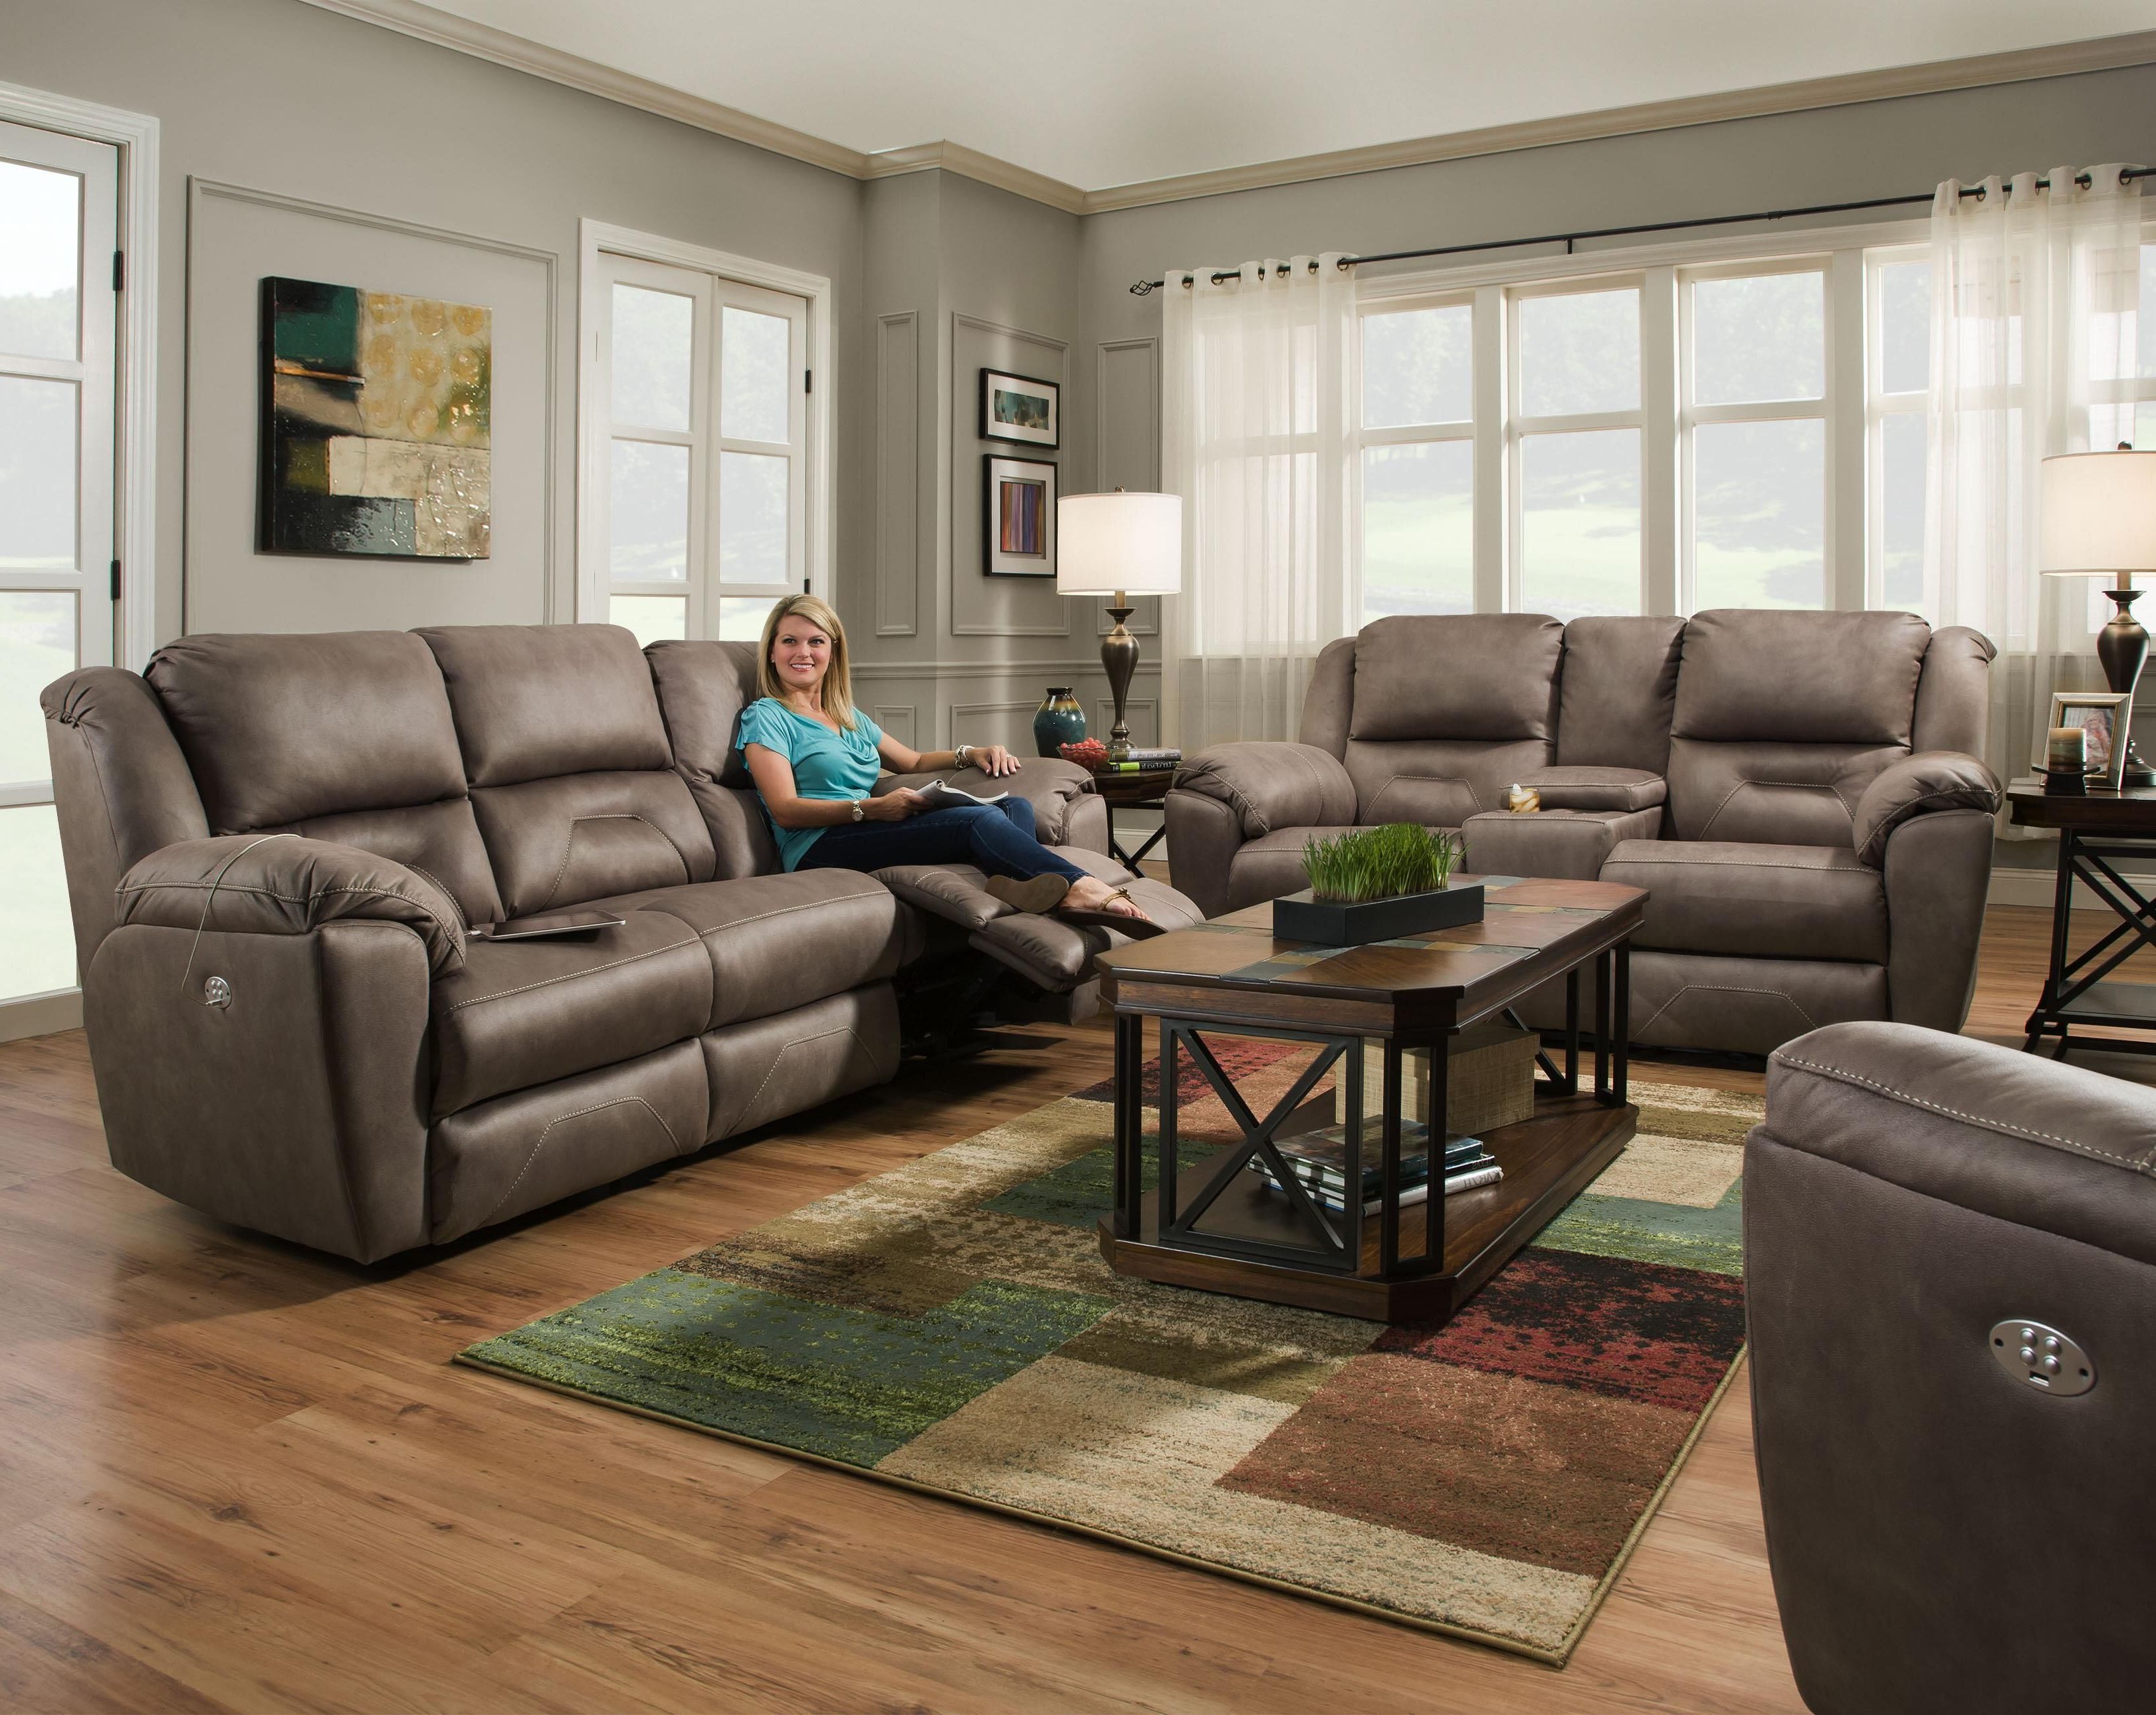 Latest Travis Dk Grey Leather 6 Piece Power Reclining Sectionals With Power Headrest & Usb Throughout Custom Order Your Fabrics, Finishes, And More At Turk Furniture In (View 10 of 20)